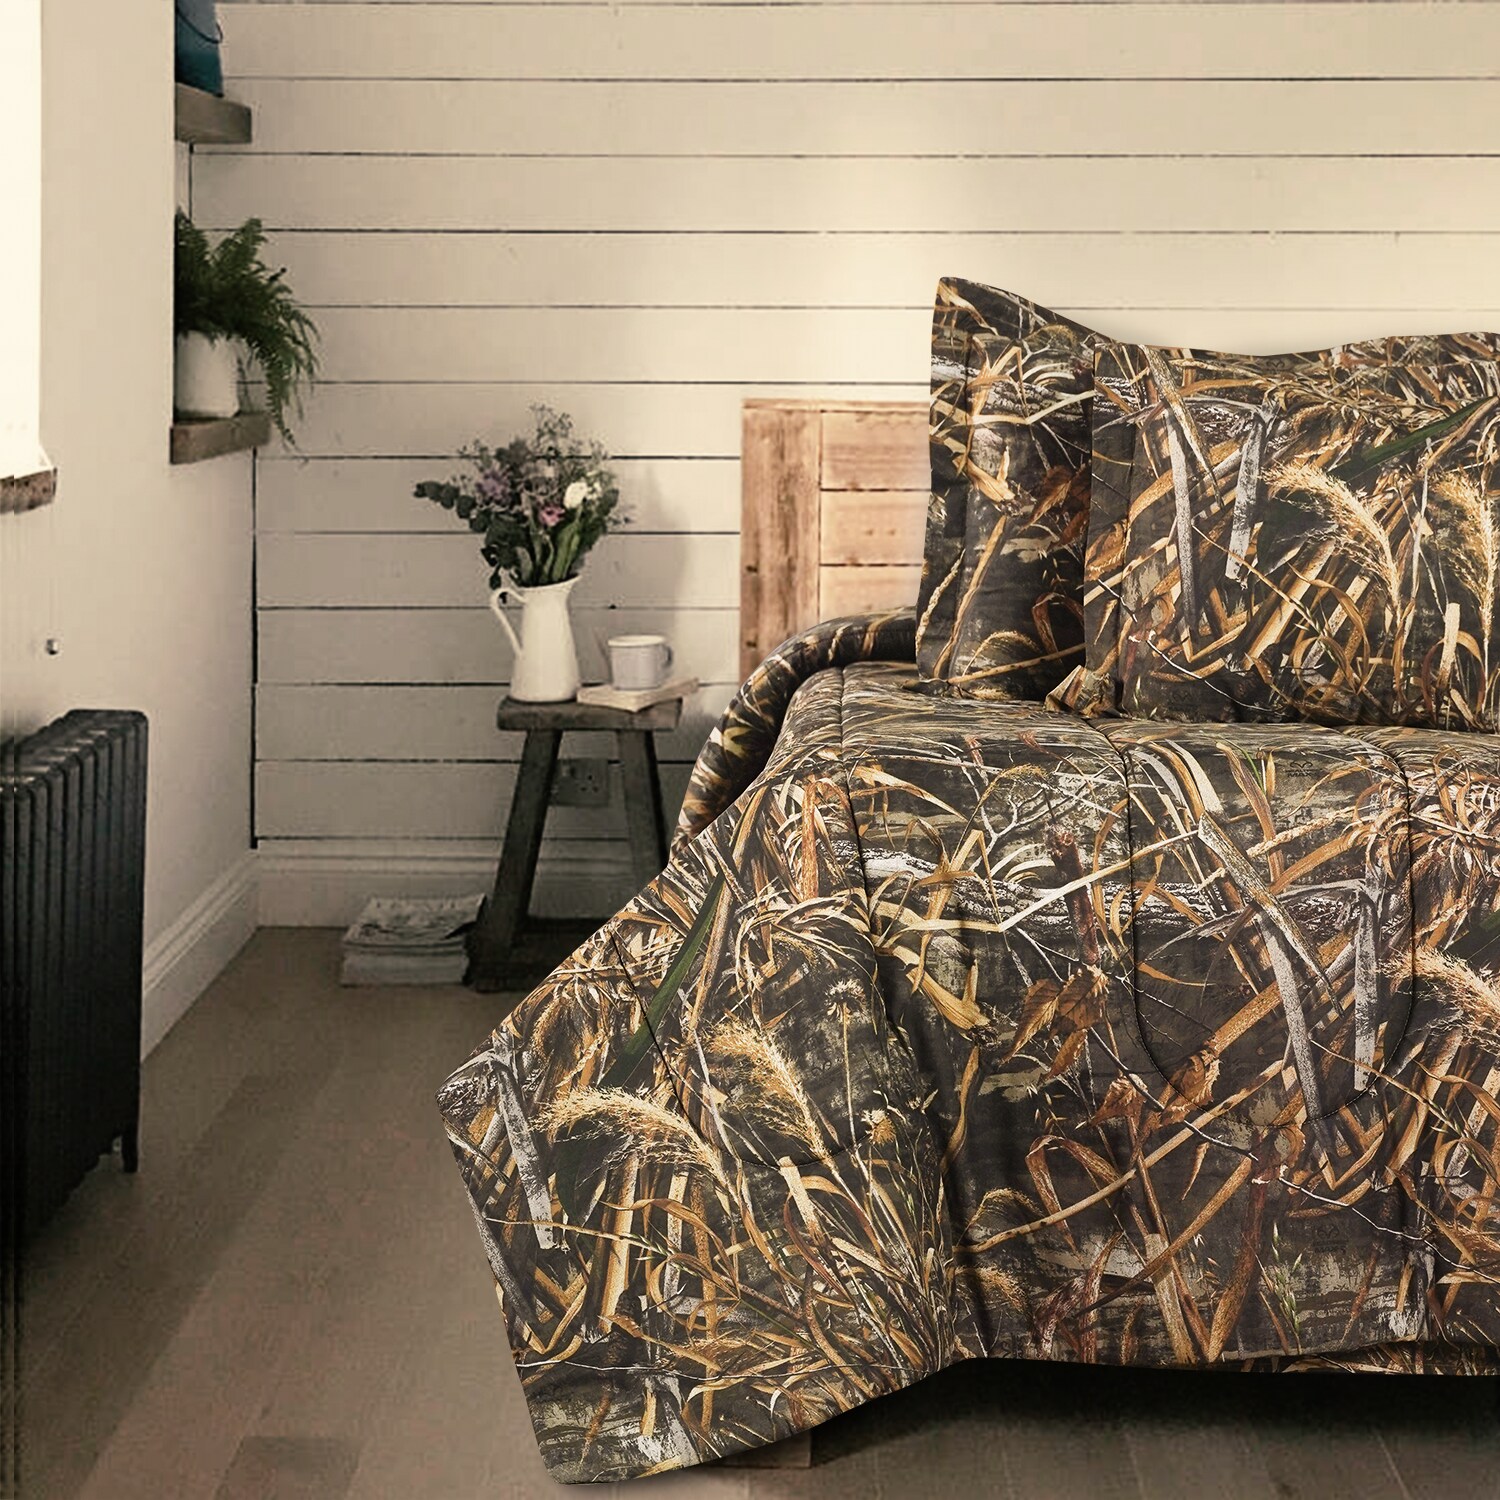 Details about   Realtree Xtra 10pc Bath Accessory Set Camo Rustic Mountain Cabin Licensed Resin 